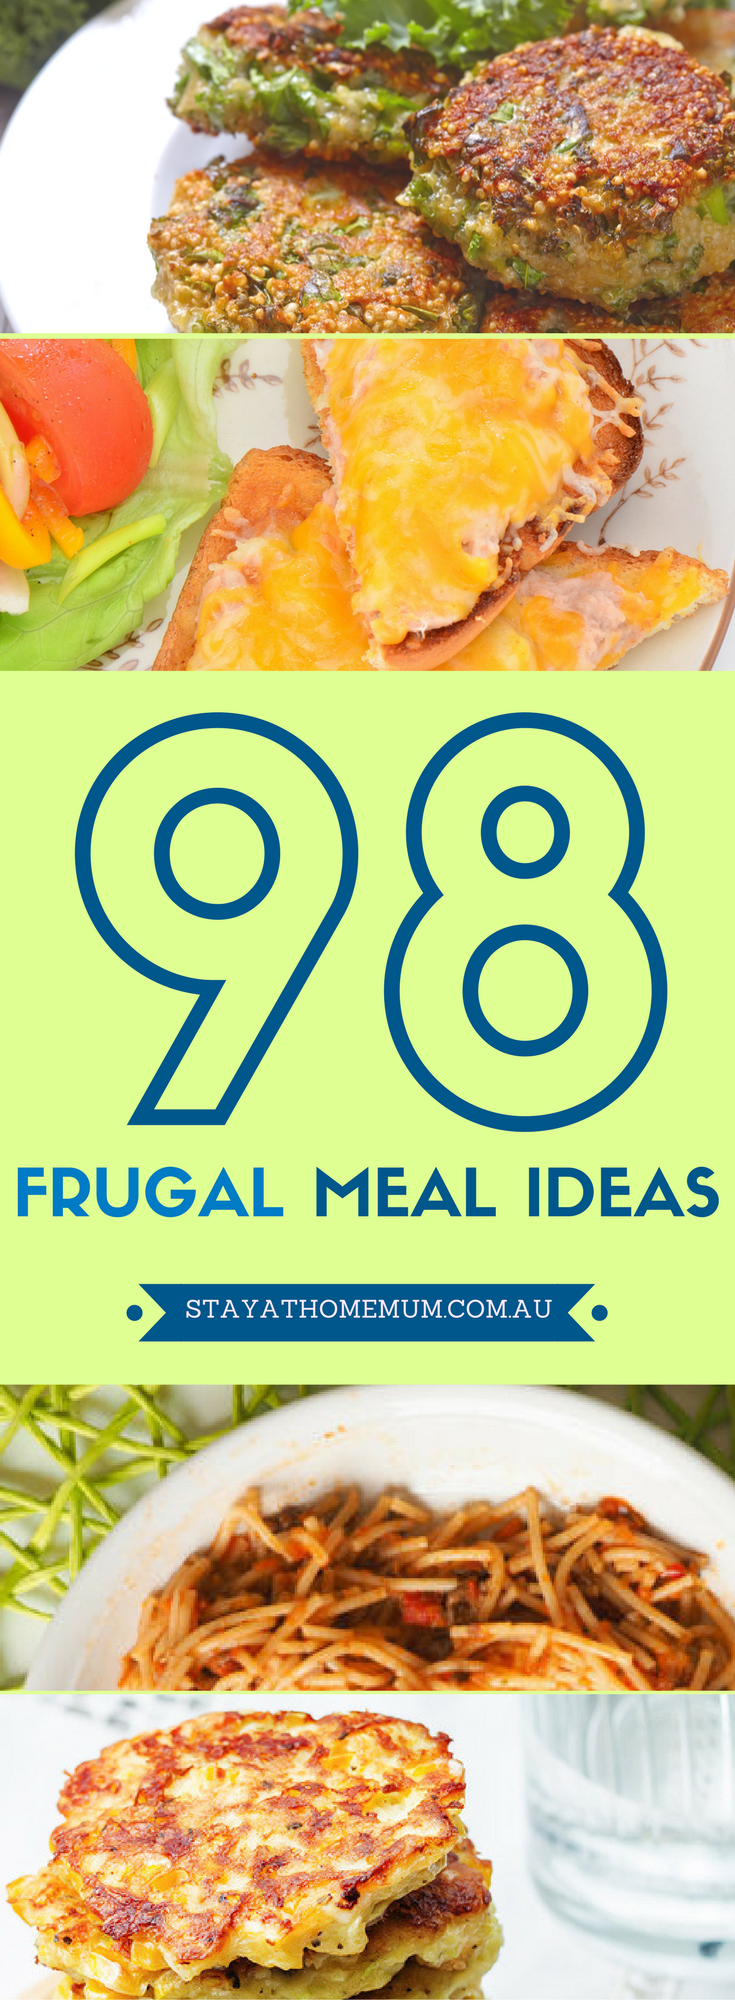 98 Frugal Meal Ideas - Stay at Home Mum